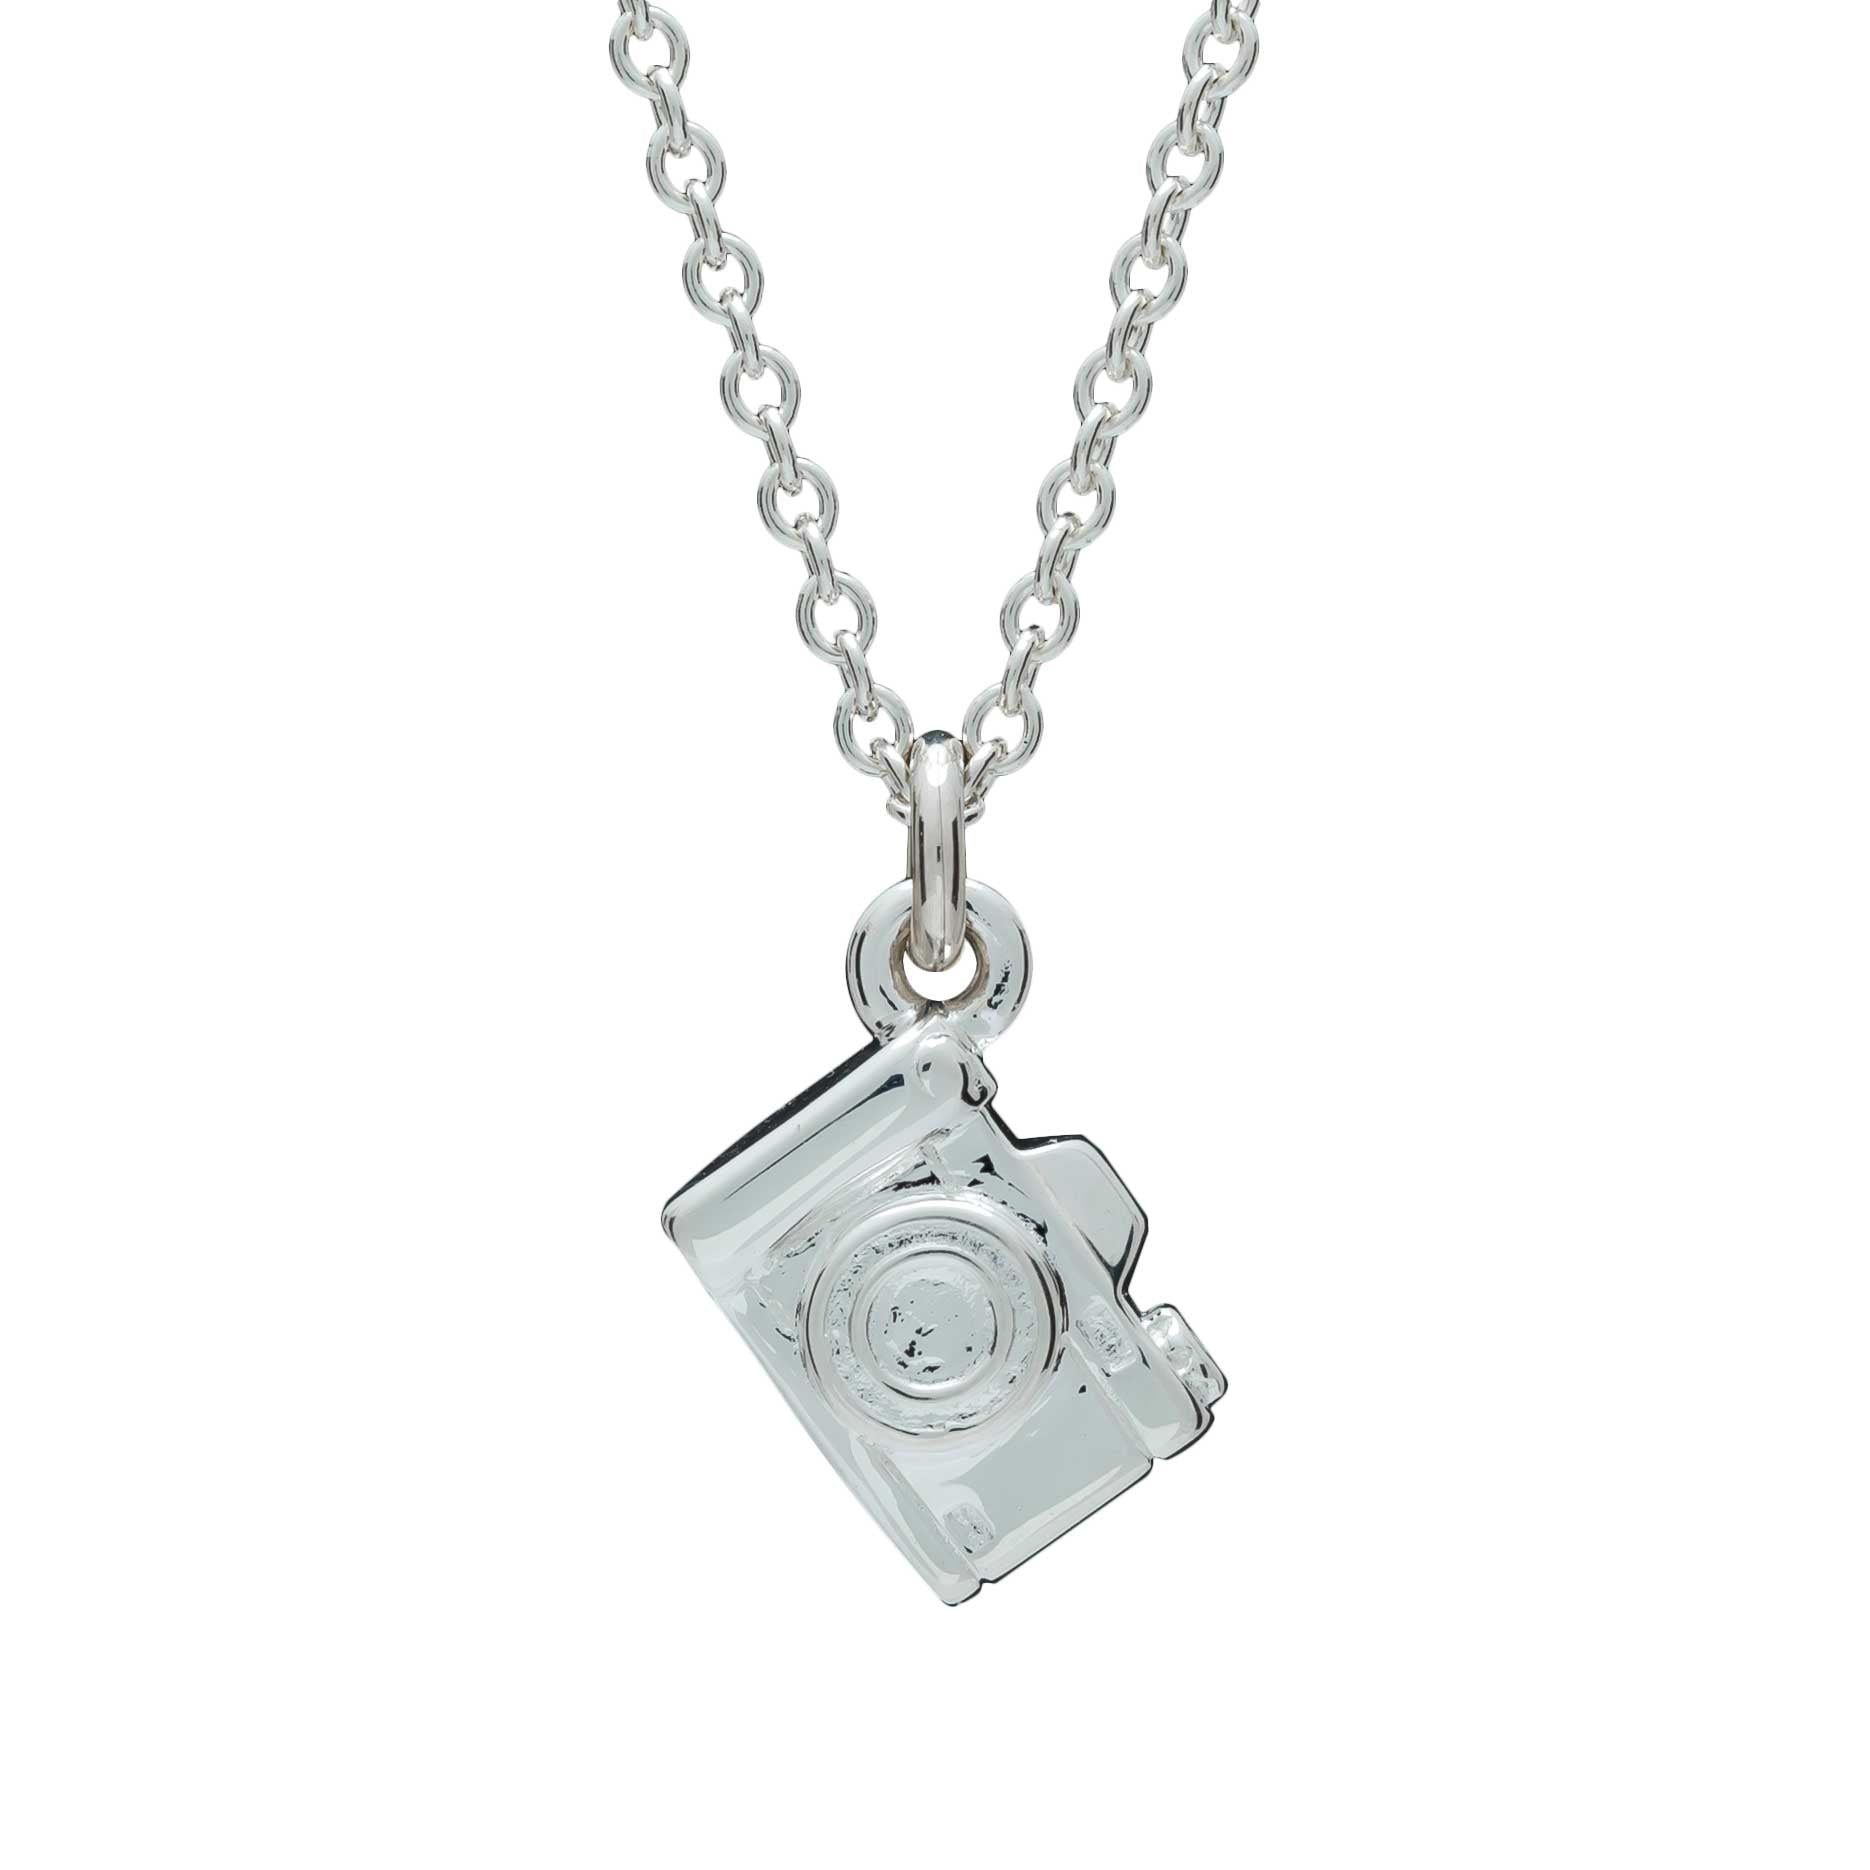 Camera Silver Necklace - Vintage SLR Camera Pendant for photographers and travelers trace chain